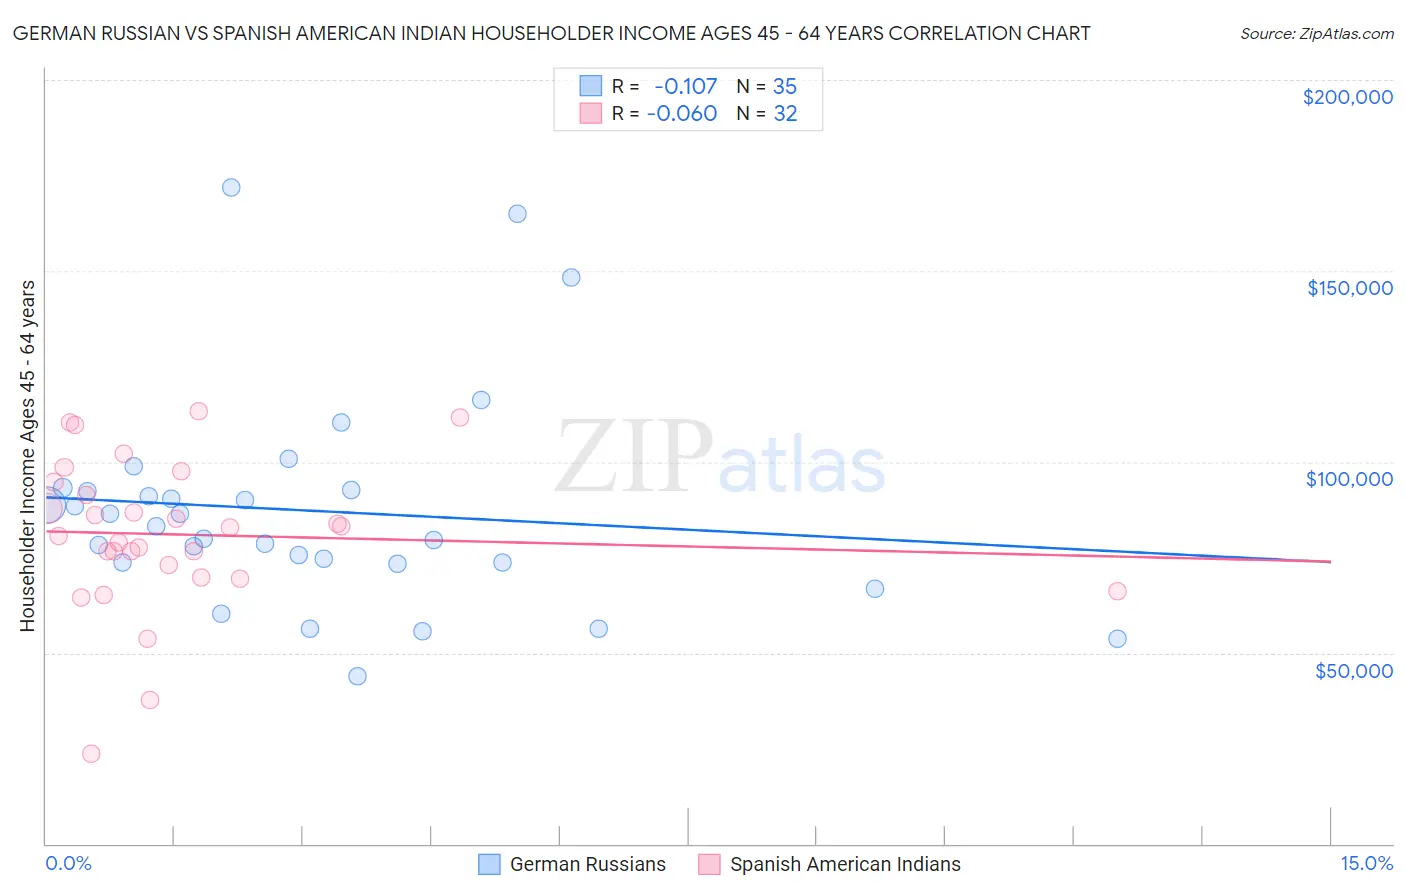 German Russian vs Spanish American Indian Householder Income Ages 45 - 64 years